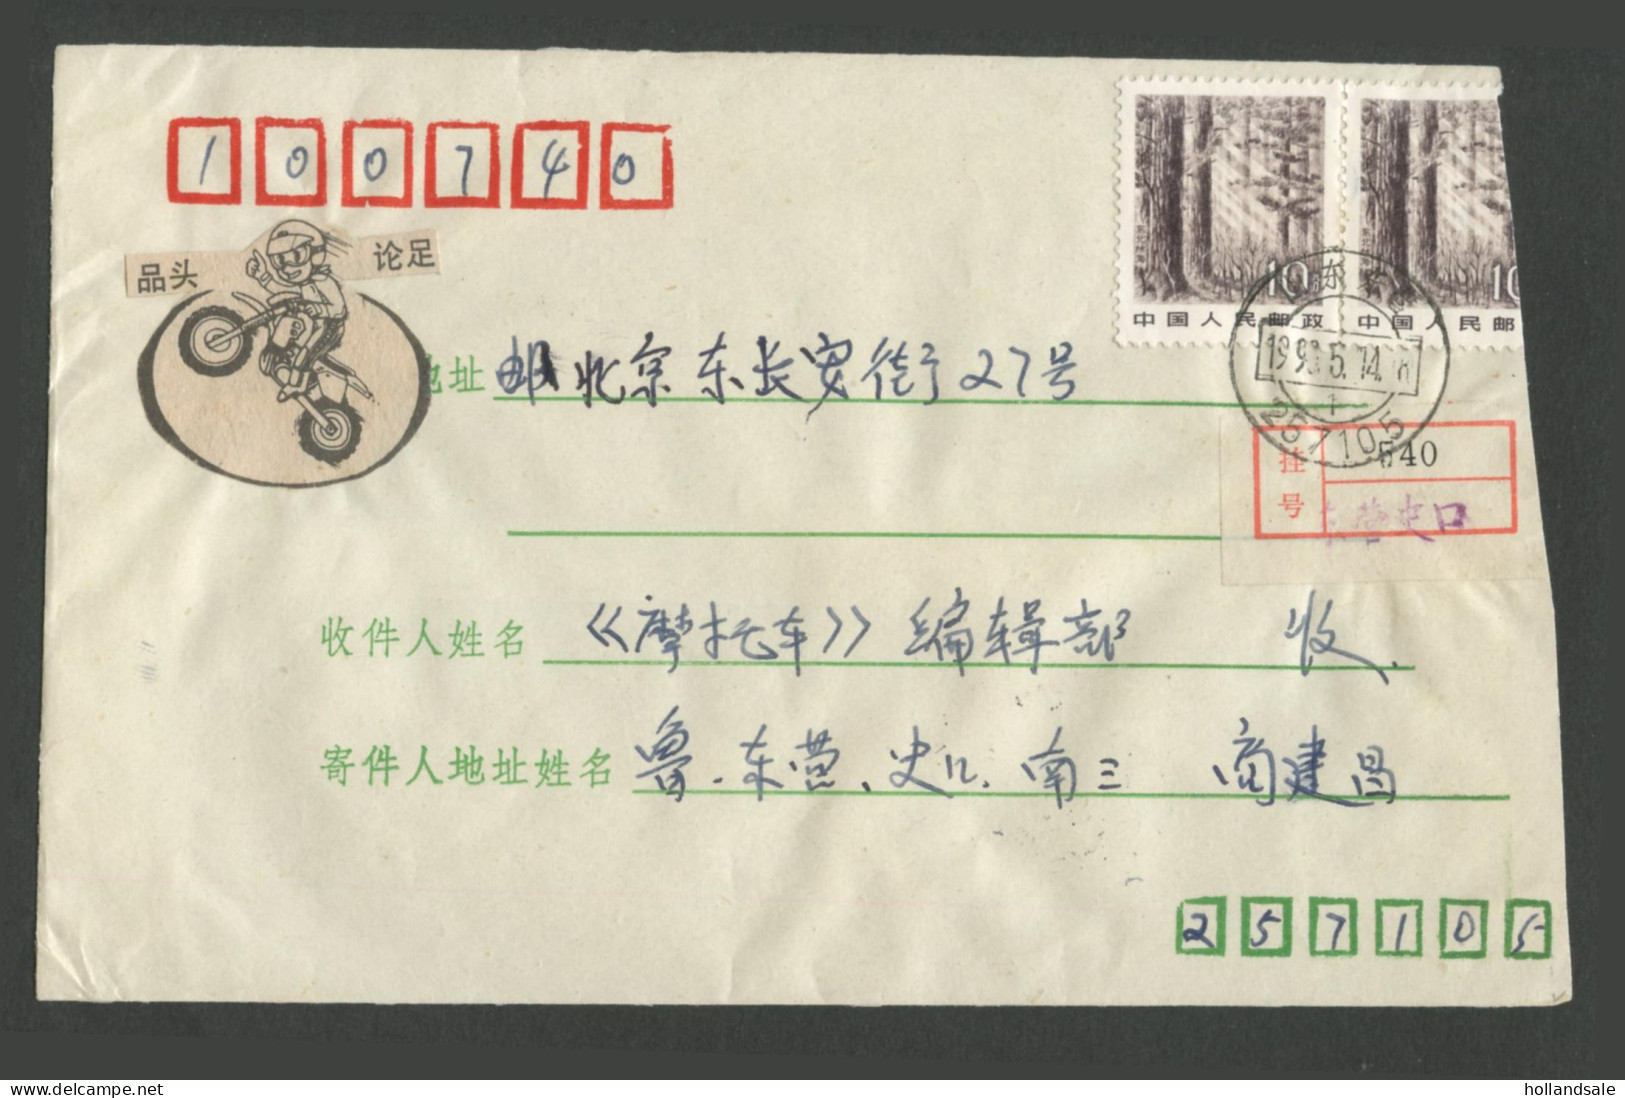 CHINA PRC / ADDED CHARGE - Cover With Label Of Dongyin, Shandong Province. PALMER 27:2 - Postage Due